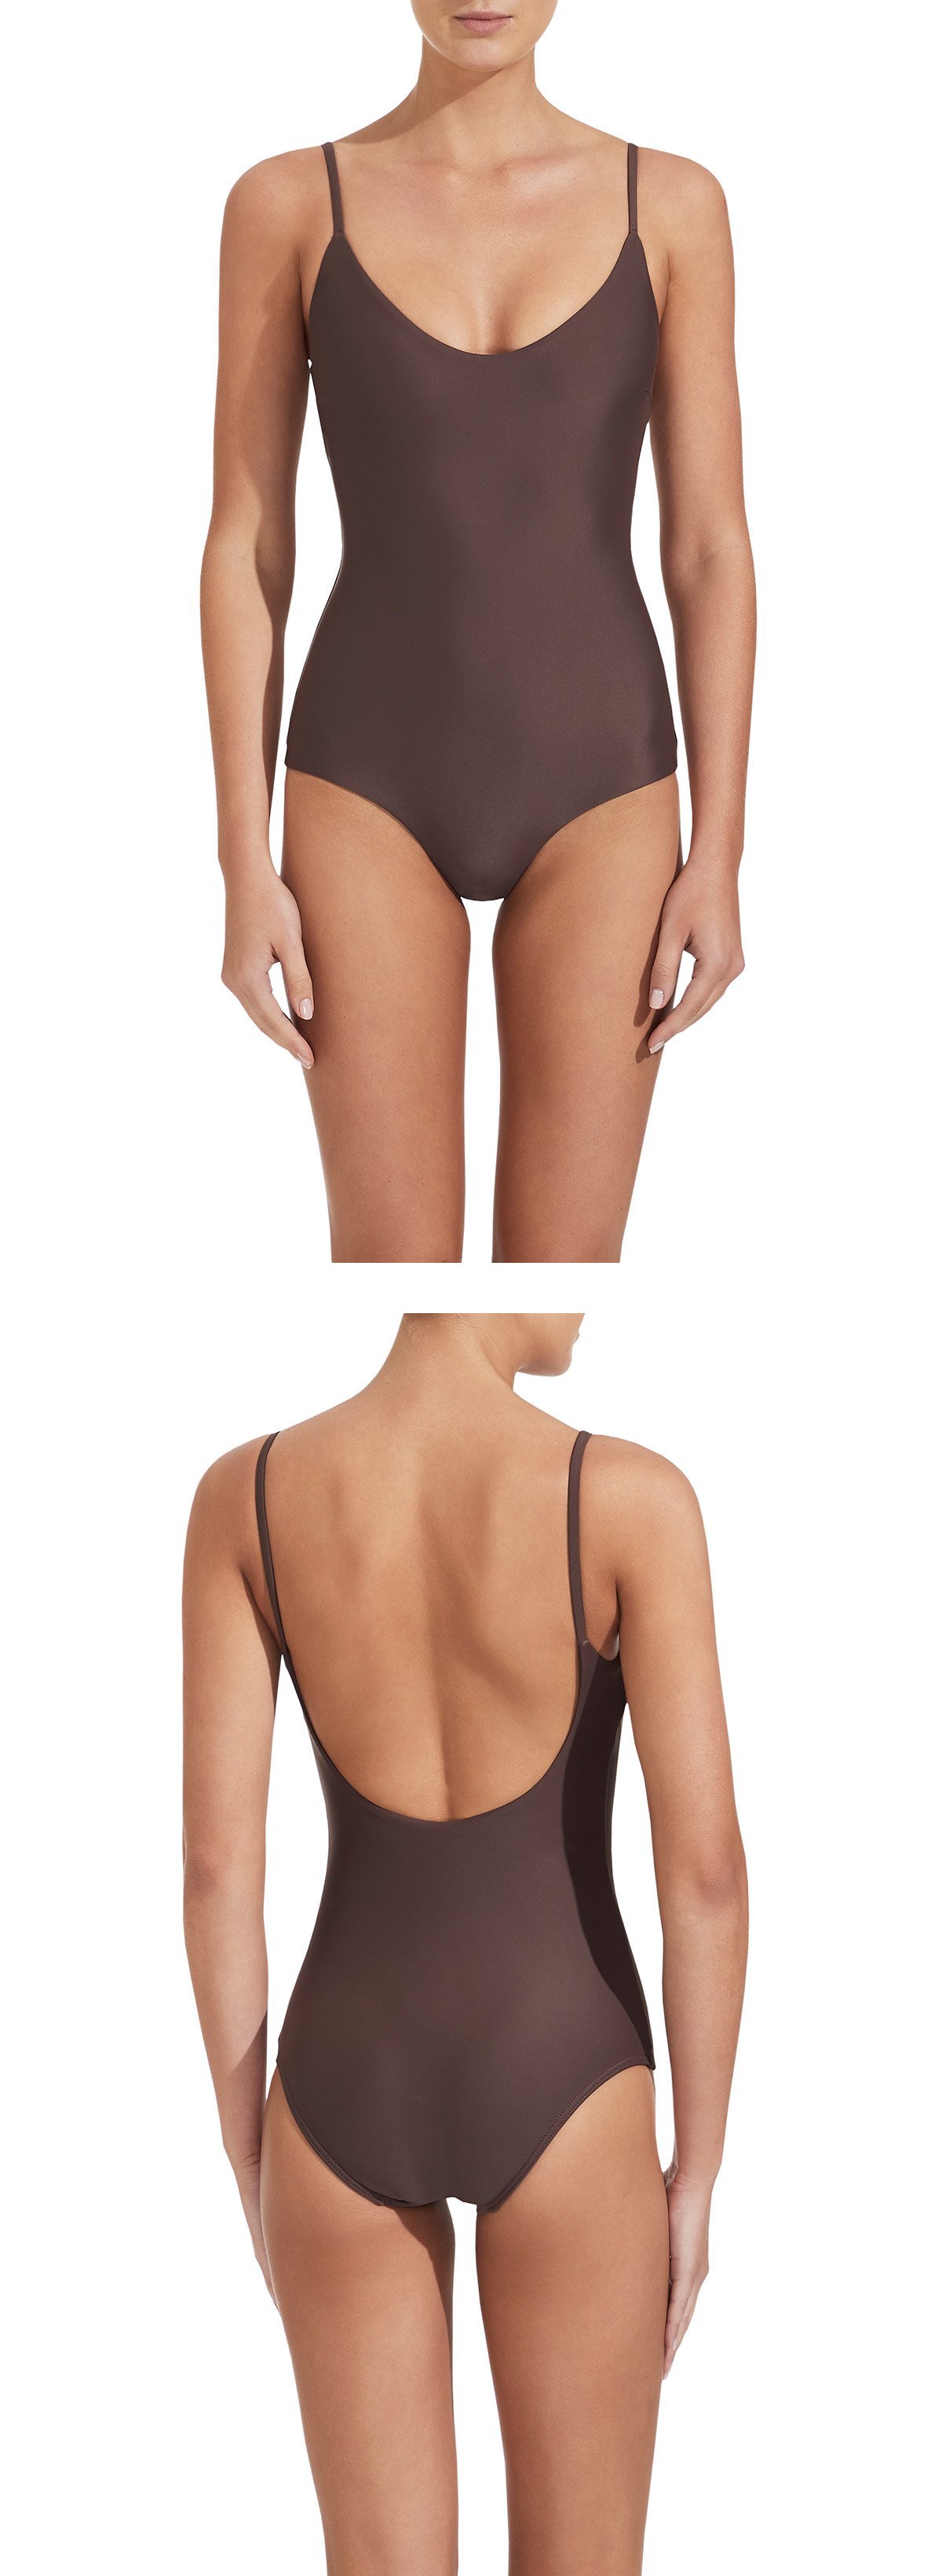 Summertime | Shopping: In Search of the Perfect Swimsuit